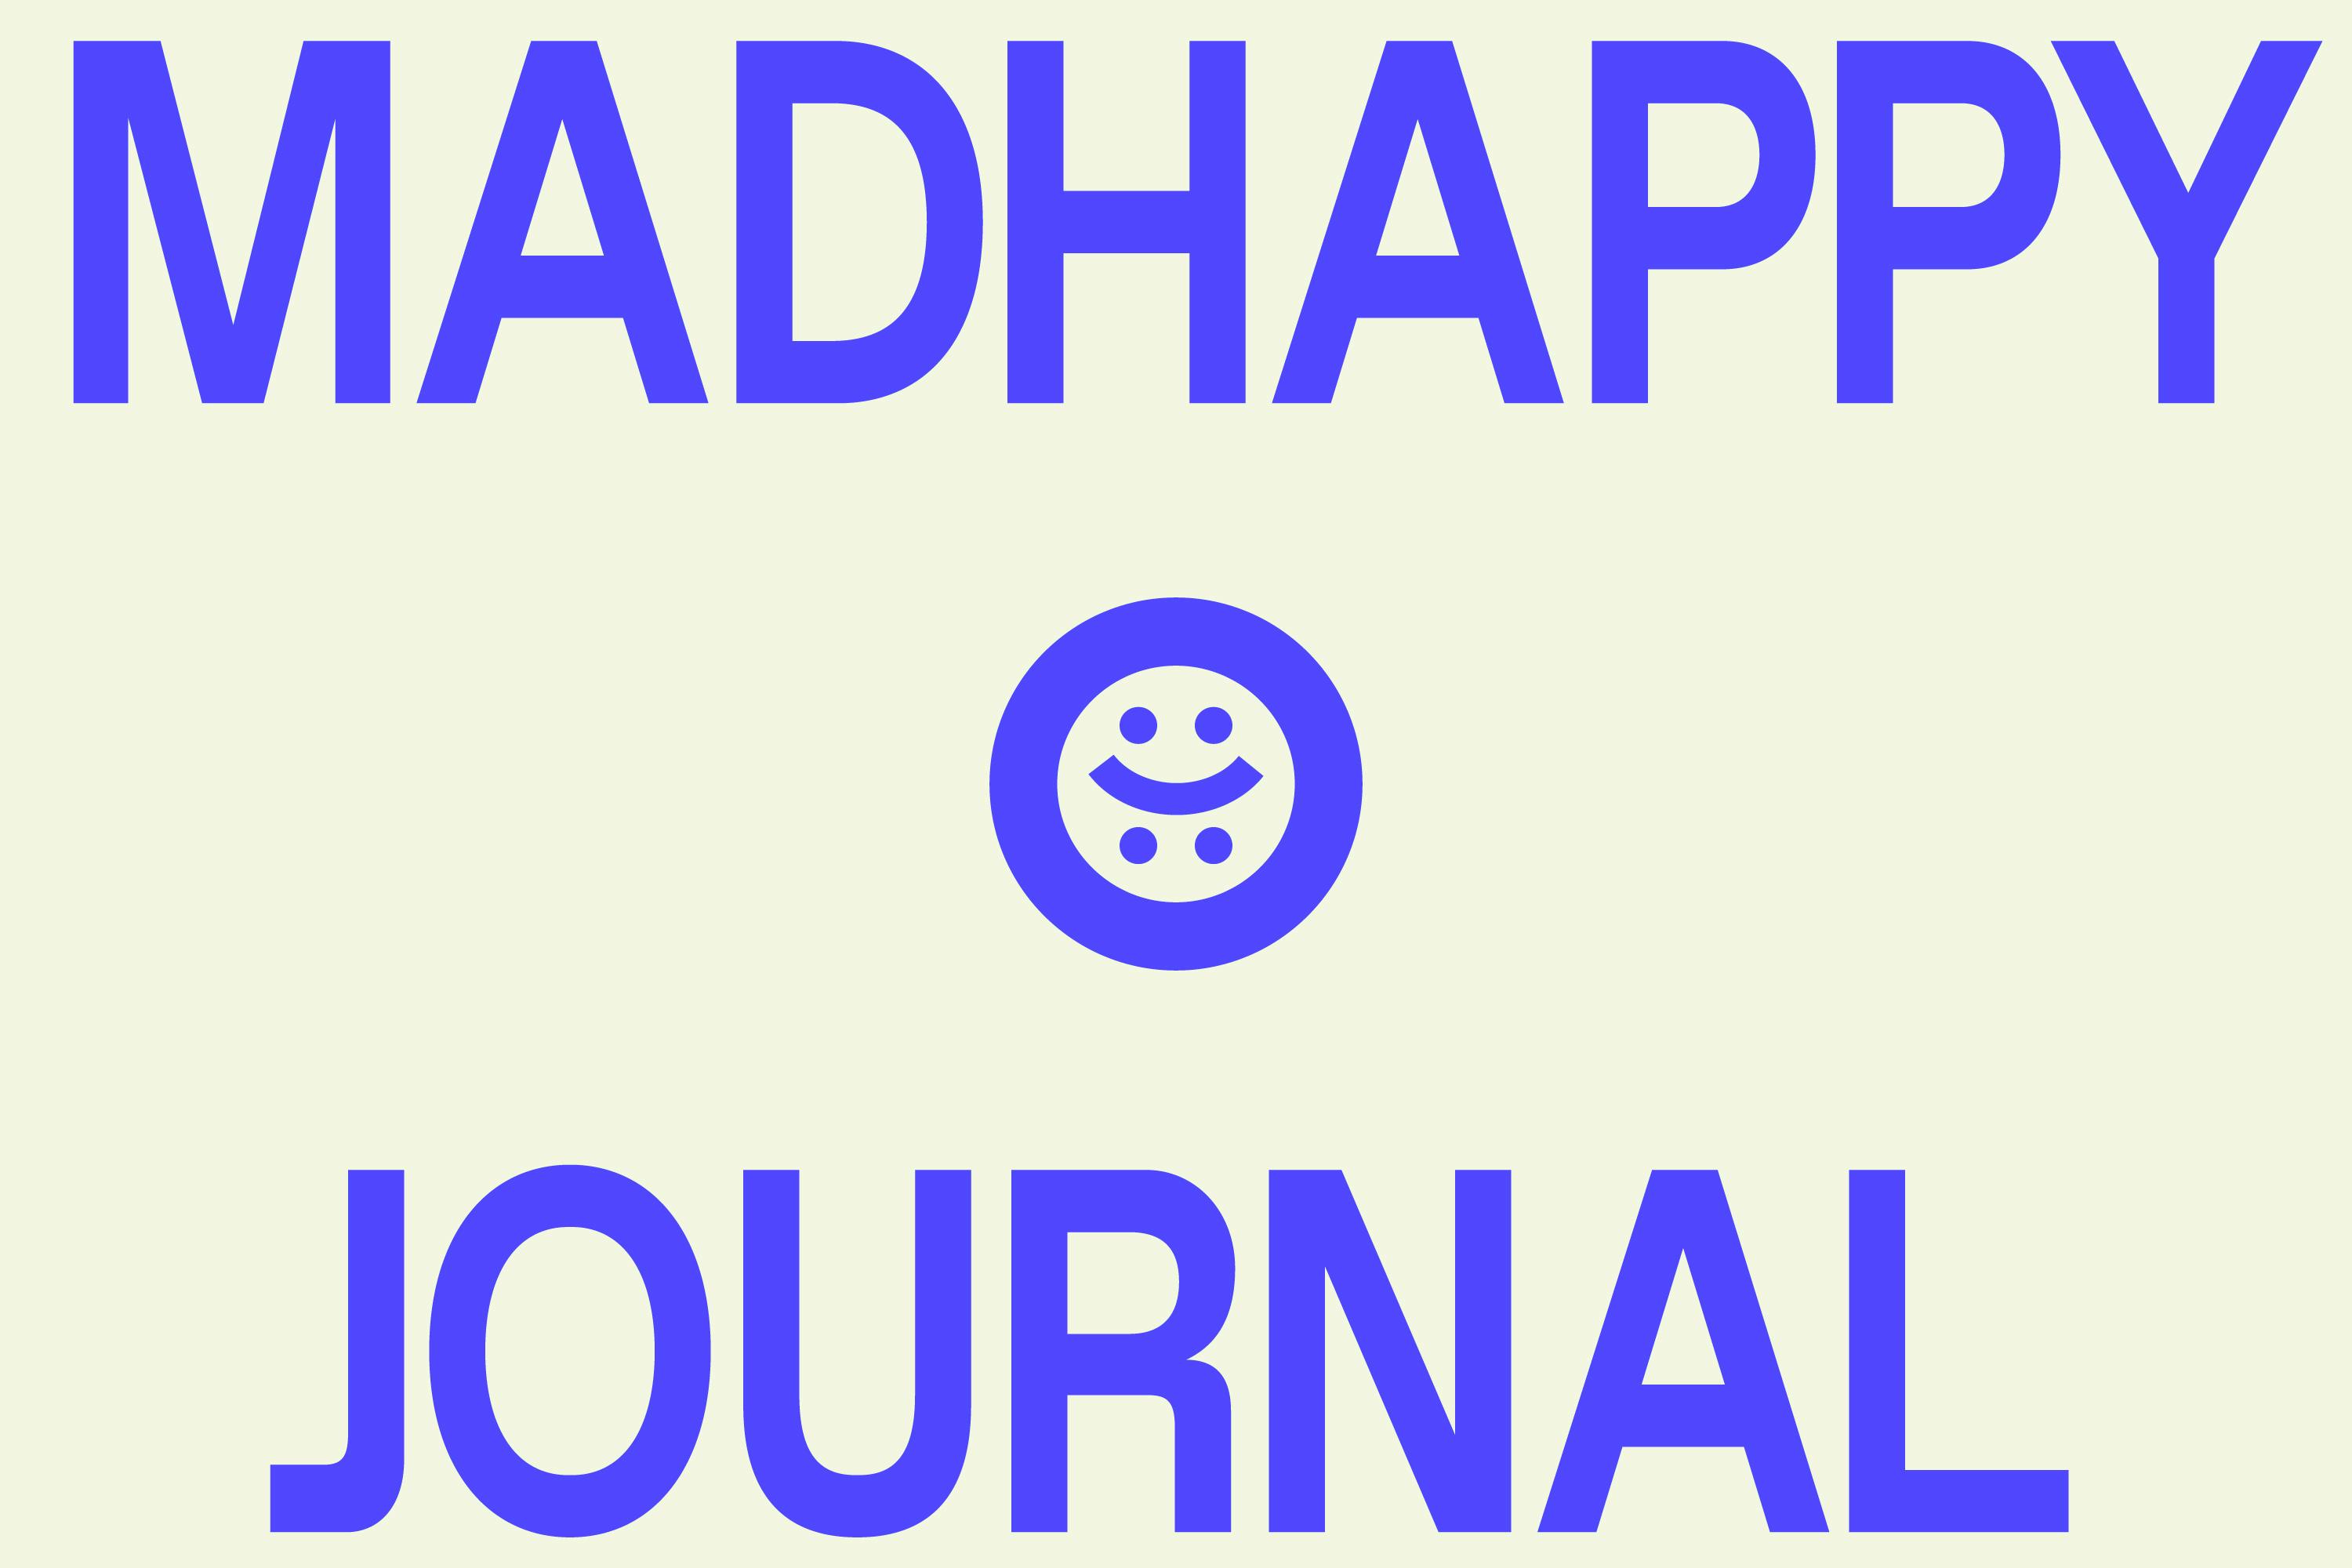 The Madhappy Journal